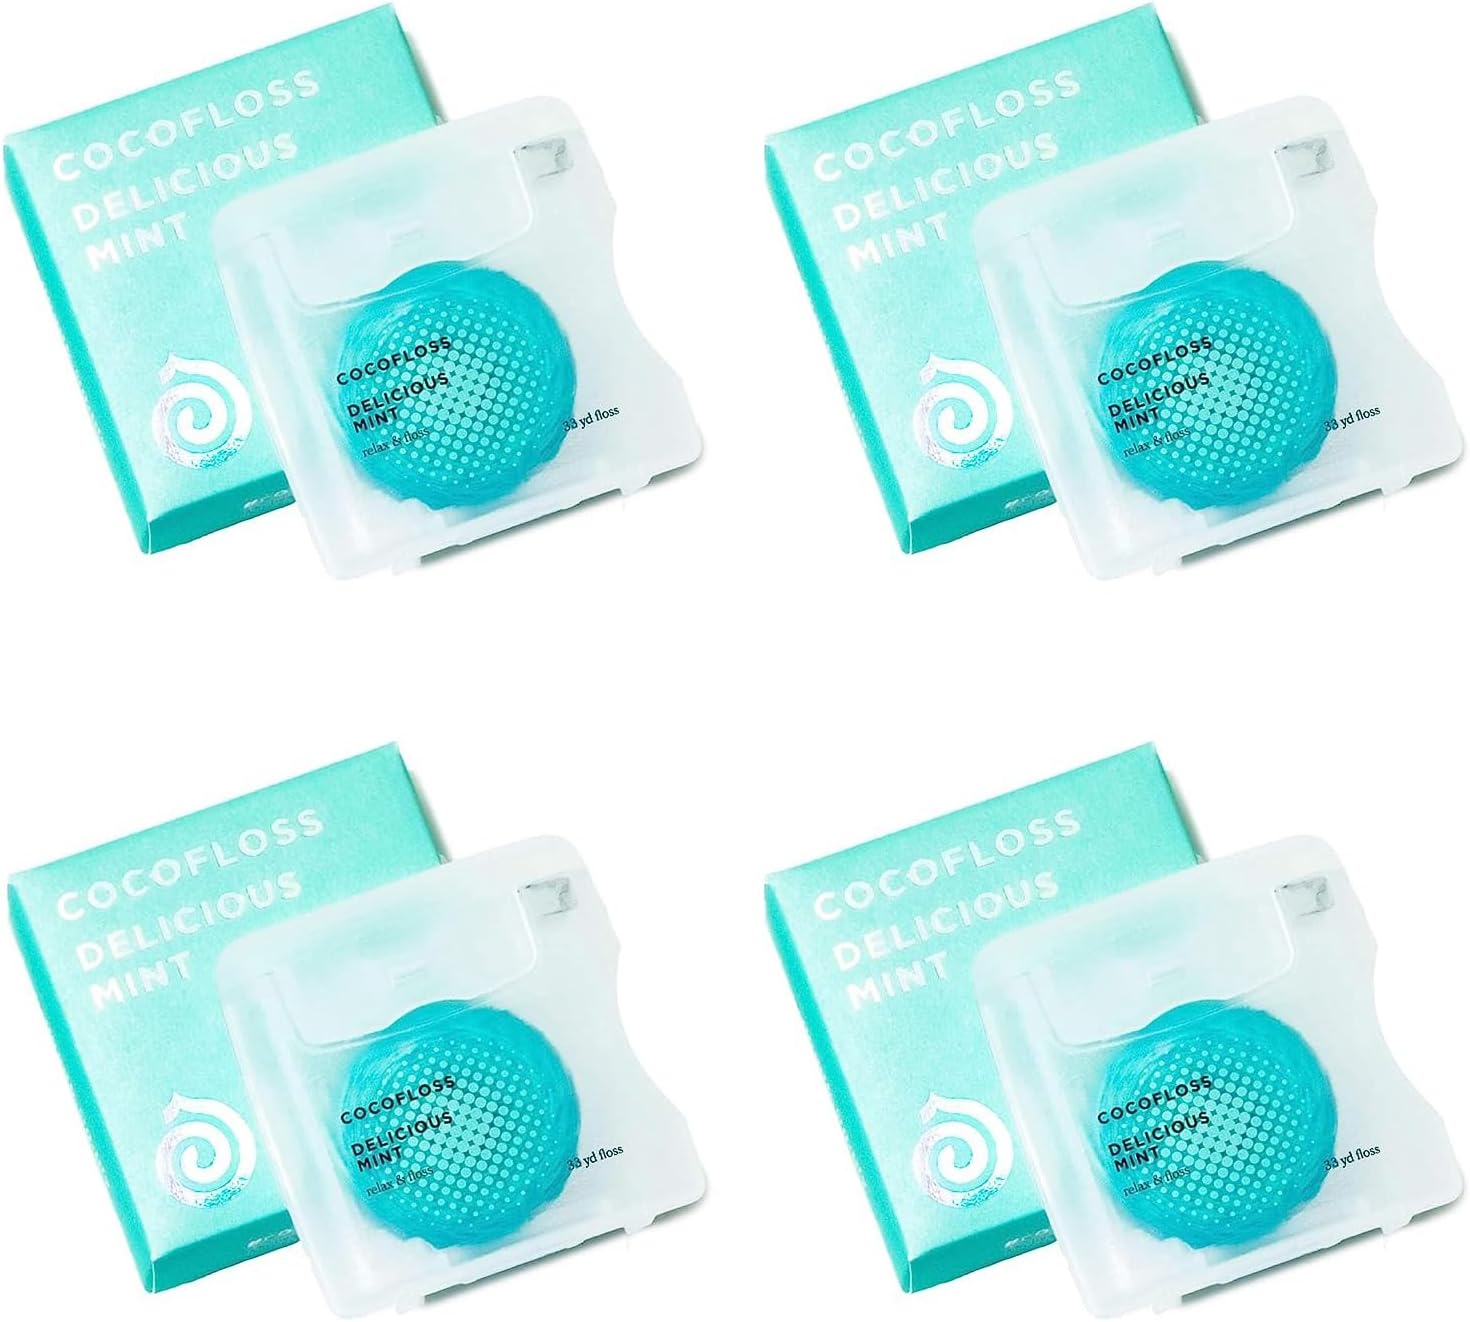 4 packs of cocofloss with teal packaging